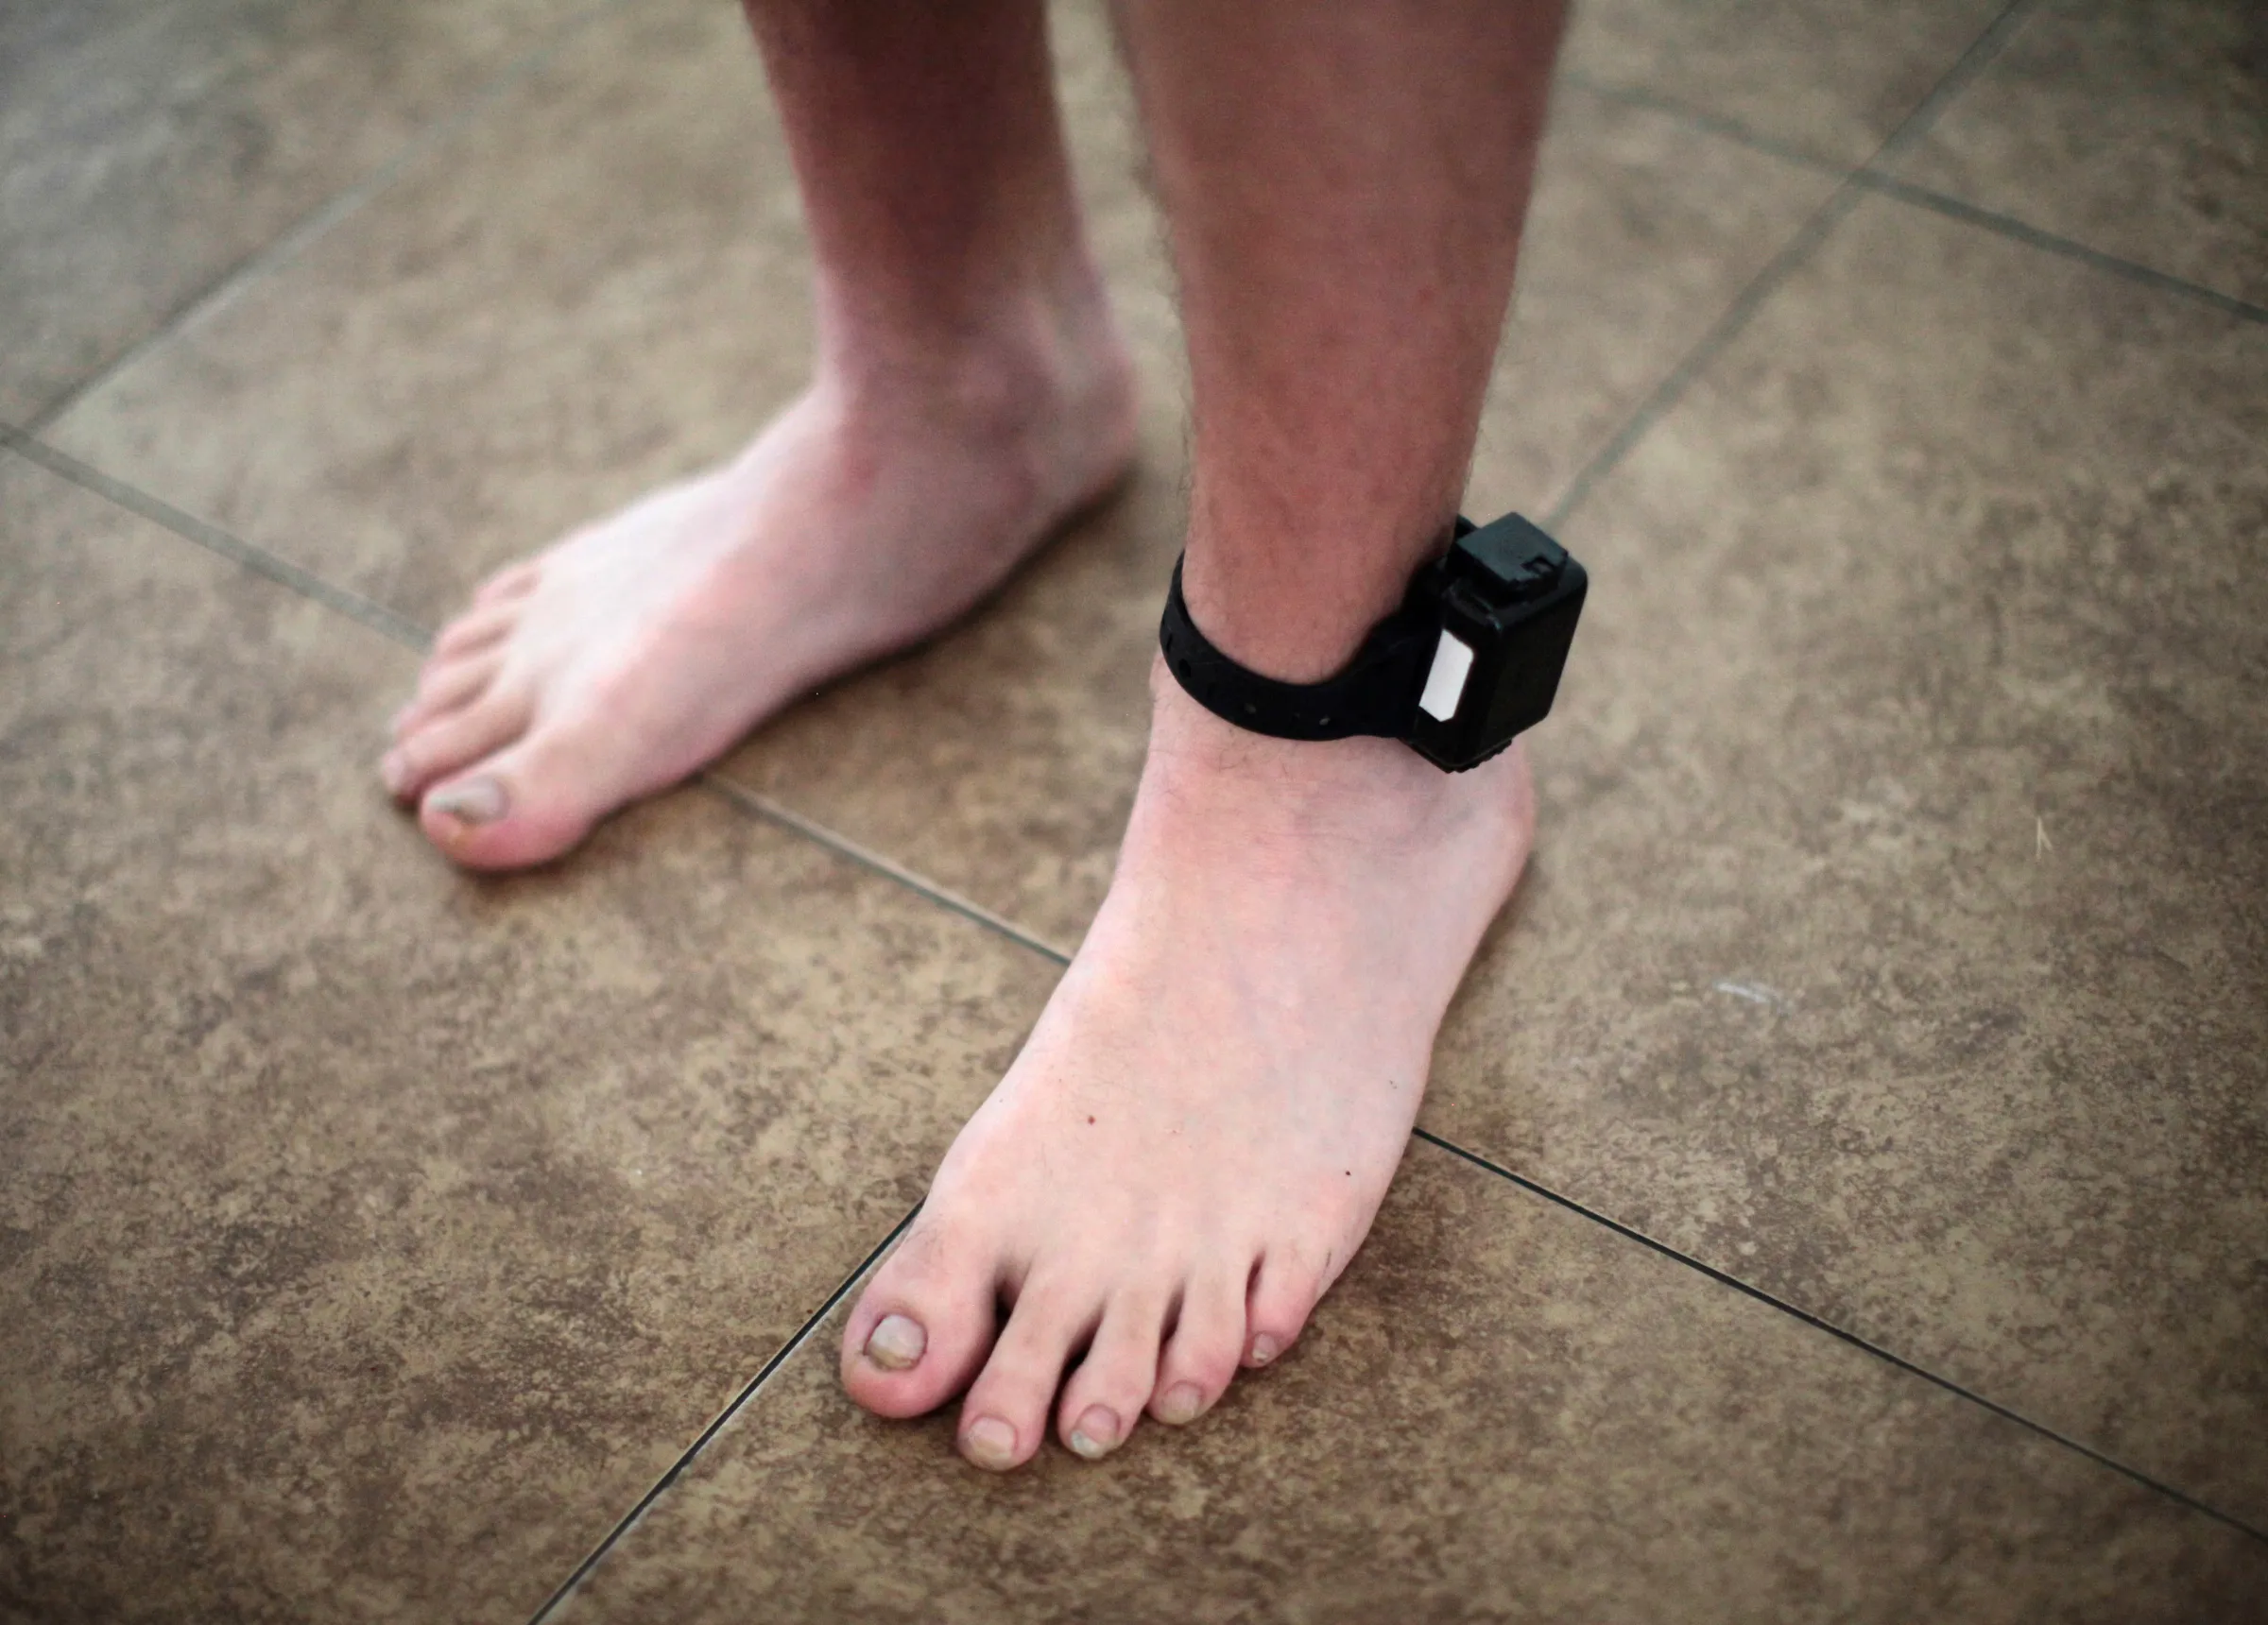 A person's feet are pictured standing on paving stone with an electronic tag around one ankle